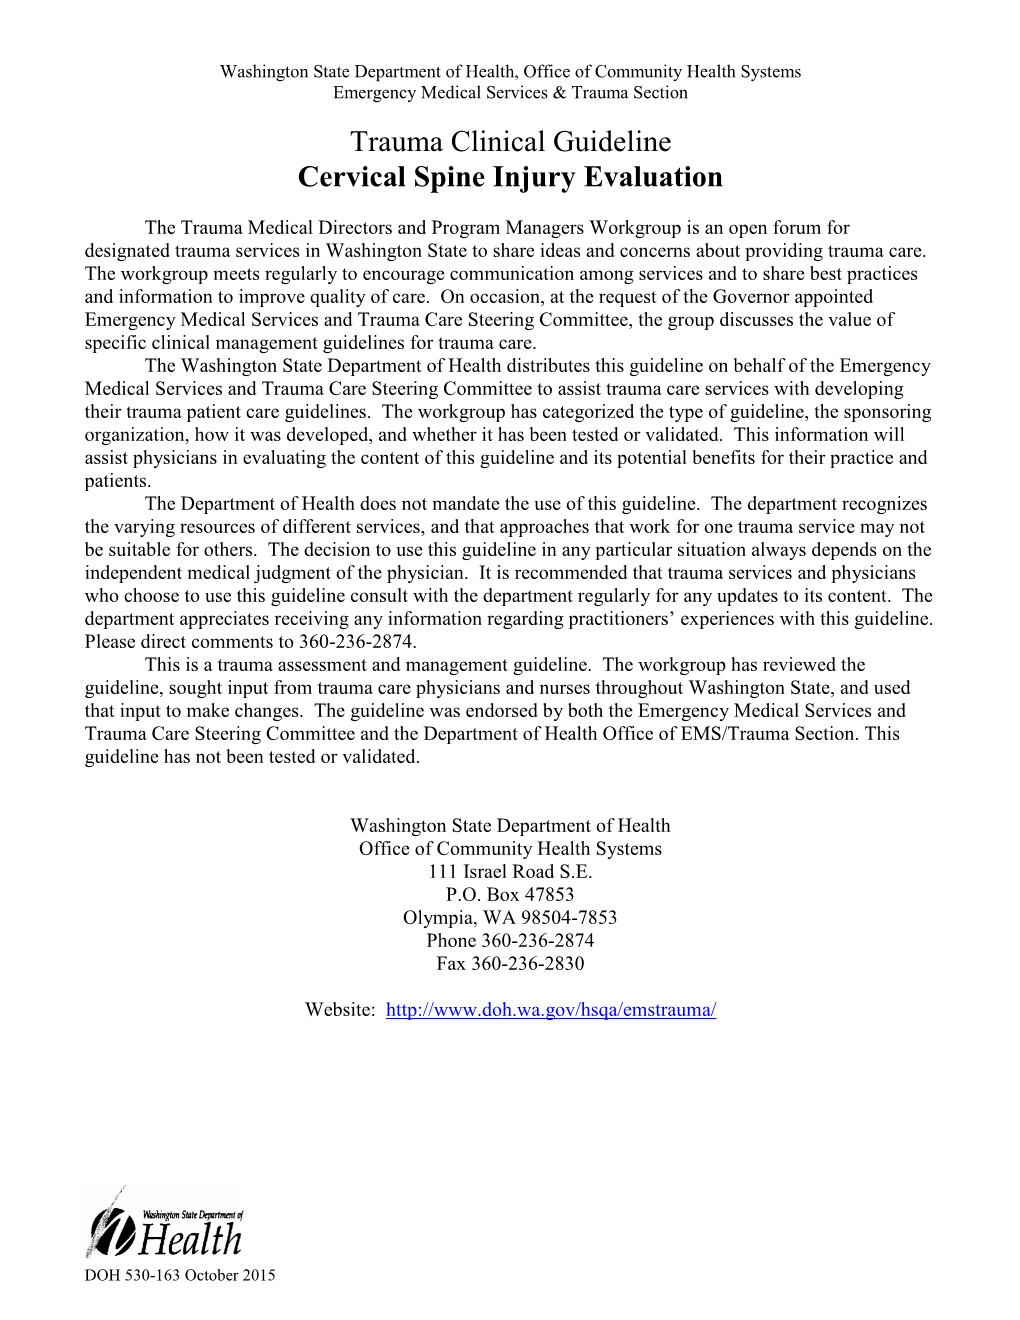 Trauma Clinical Guideline, Cervical Spine Injury Evaluation